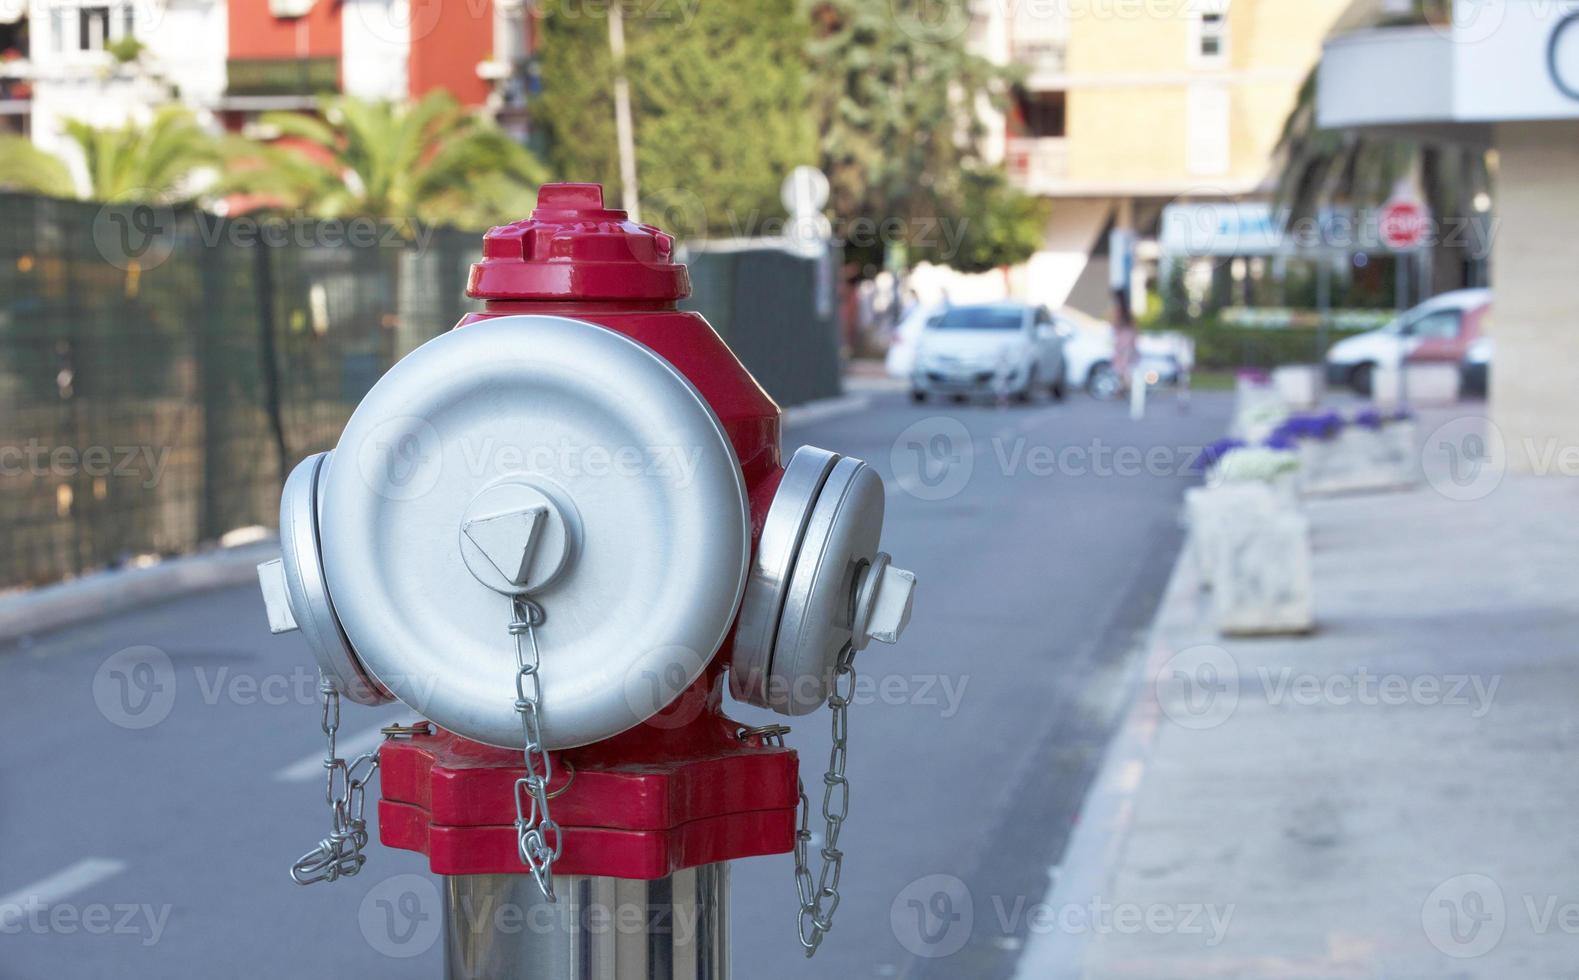 The head of the street fire hydrant in the background of the street photo